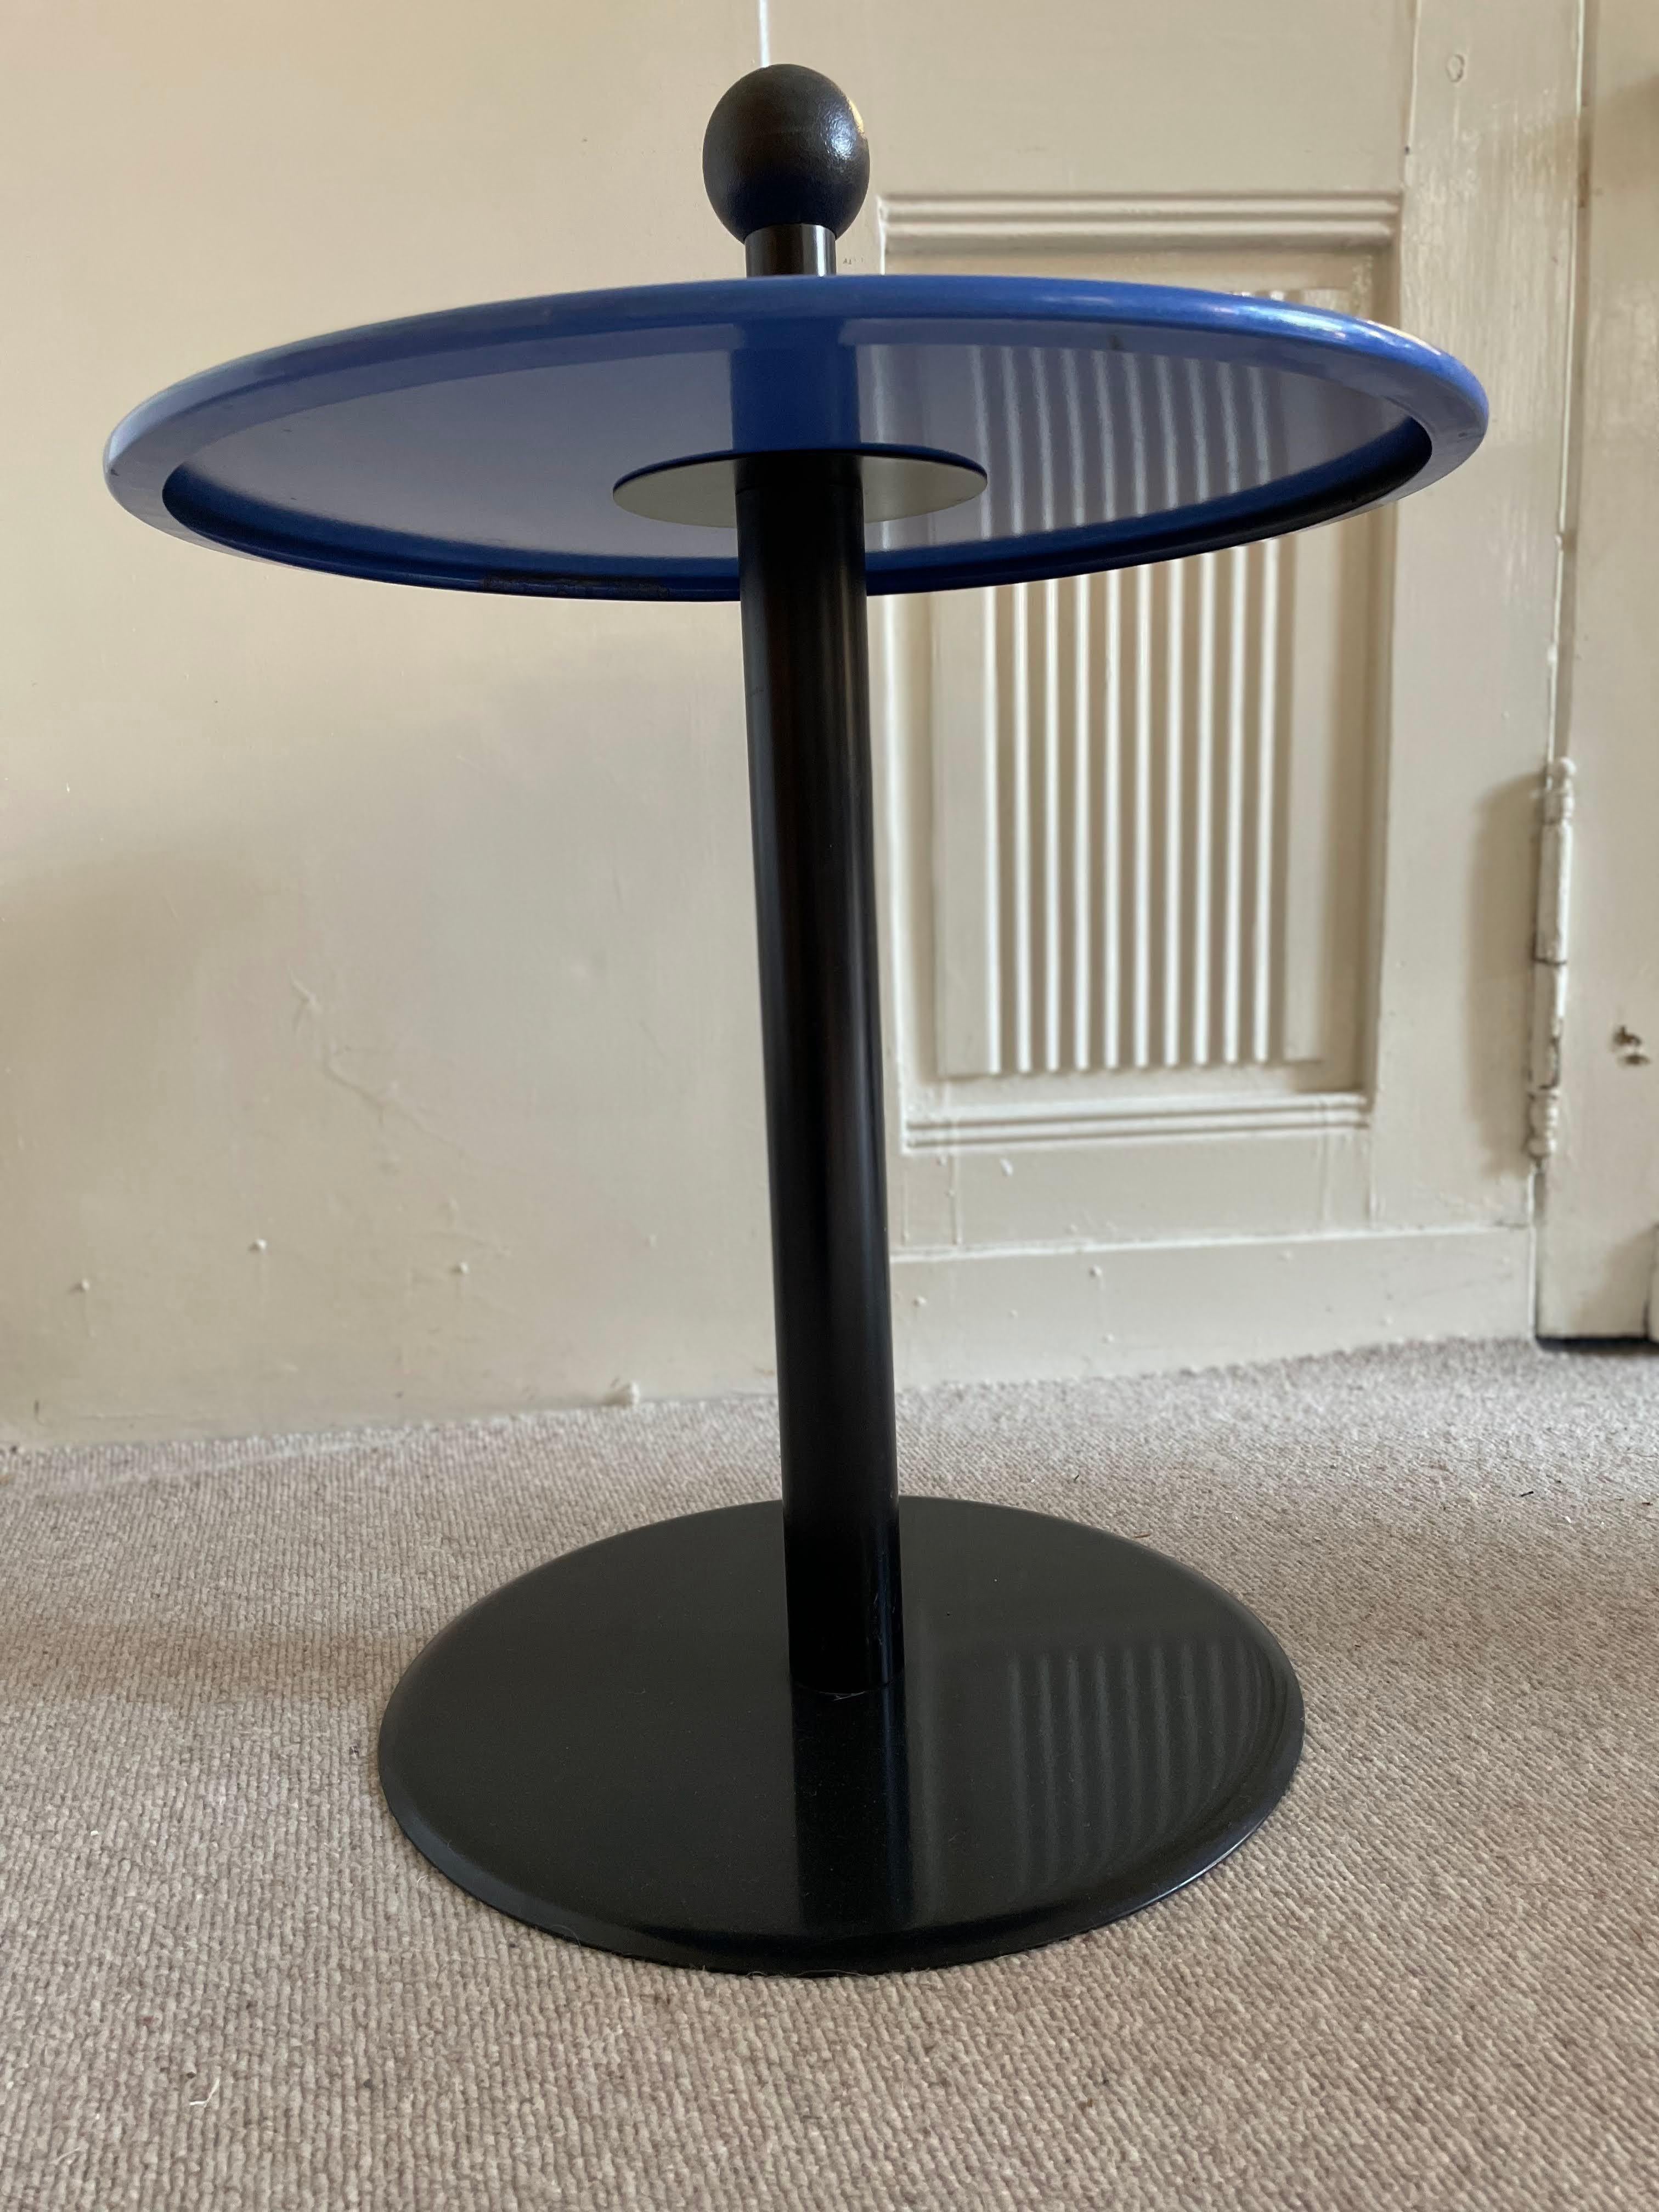 Postmodern side table from the 1980s. The ball at the top makes it easy to move the table with one hand.

The table is made of lacquered steel. The handle ball is made of plastic.

Dimensions: Diameter 51 cm, height 65 cm.